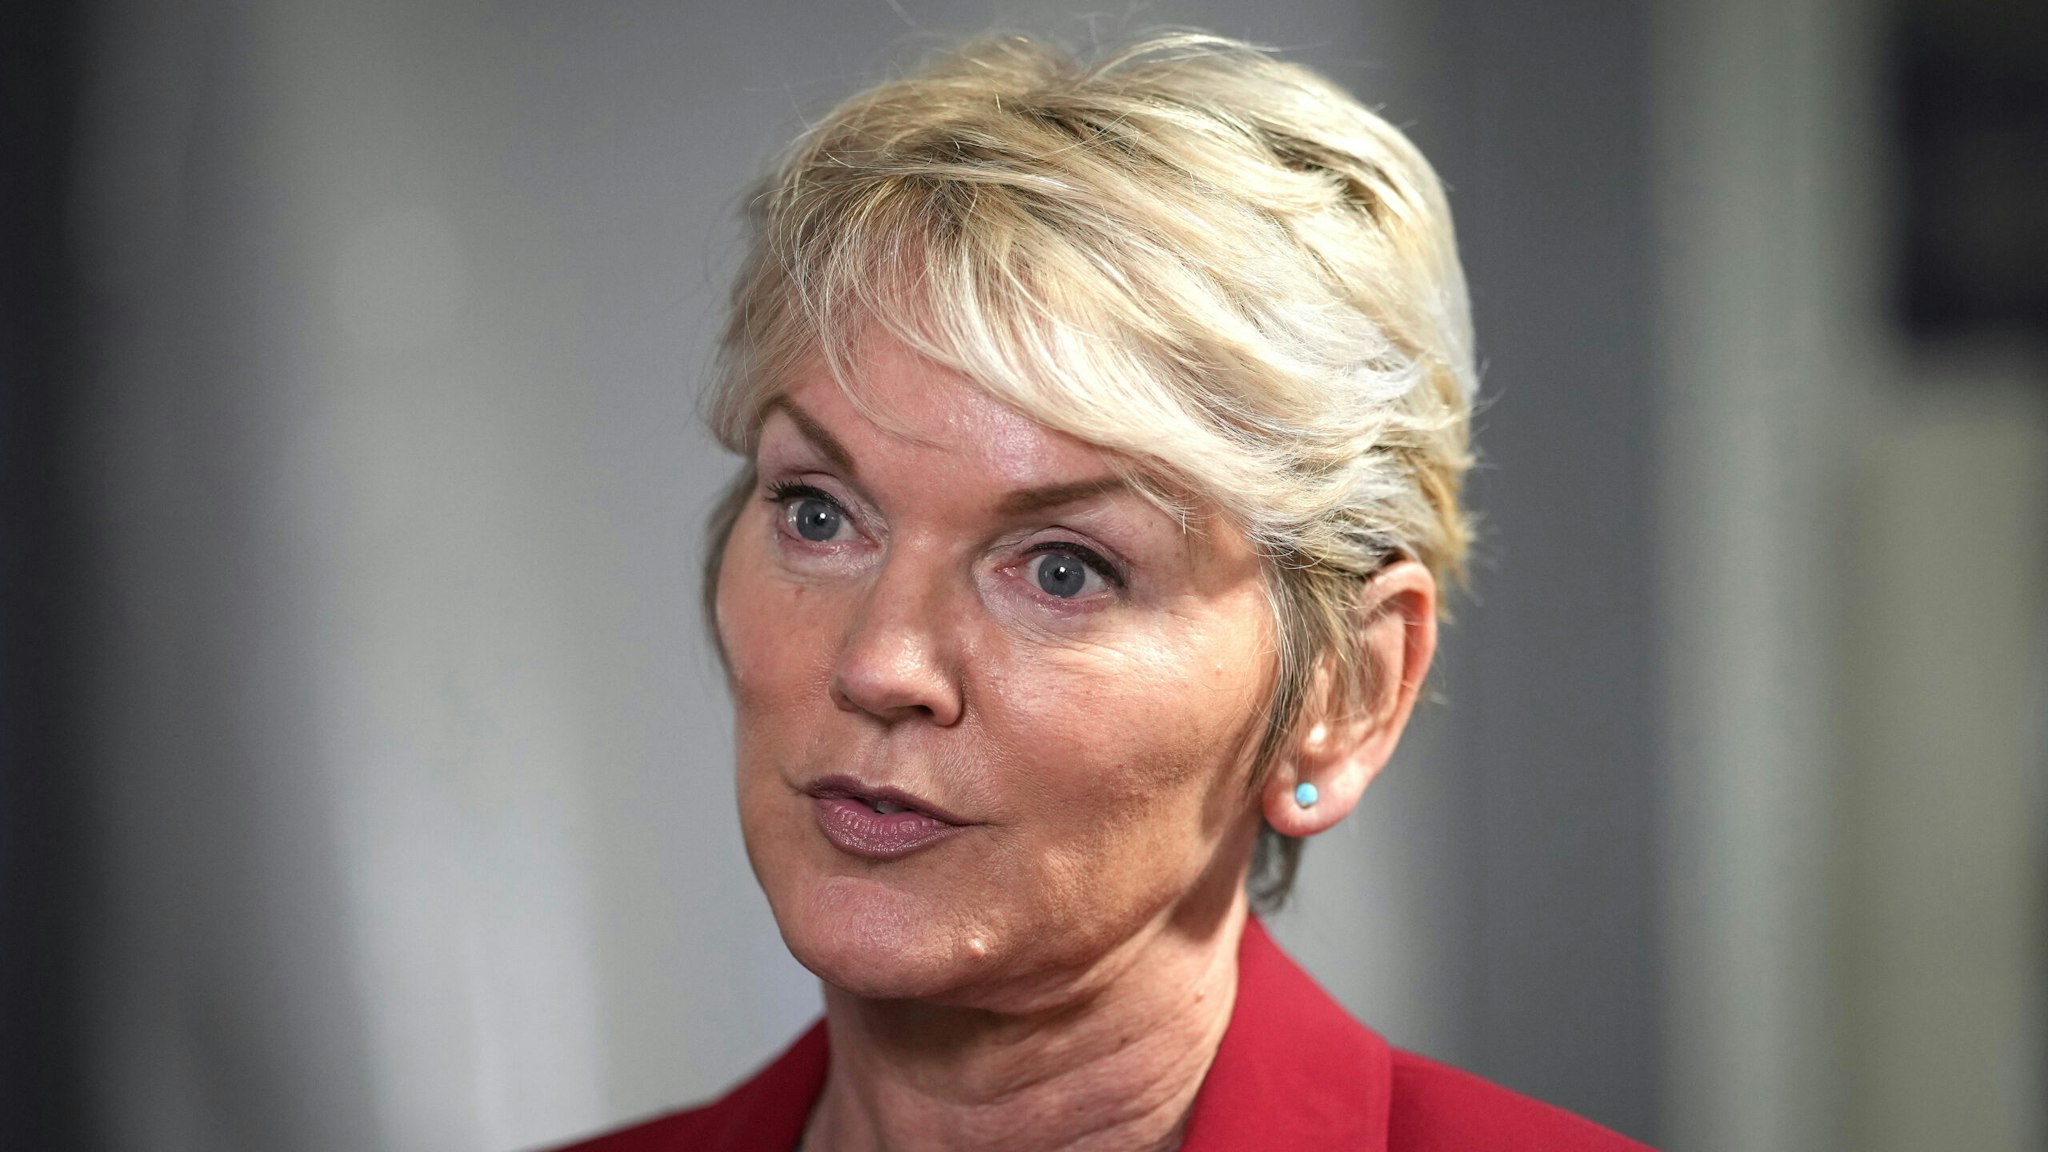 GLASGOW, SCOTLAND - NOVEMBER 04: U.S. Secretary of Energy Jennifer Granholm speaks to the media during Energy Day of COP26 at SECC on November 3, 2021 in Glasgow, Scotland. Today COP26 will focus on accelerating the global transition to clean energy. The 2021 climate summit in Glasgow is the 26th "Conference of the Parties" and represents a gathering of all the countries signed on to the U.N. Framework Convention on Climate Change and the Paris Climate Agreement. The aim of this year's conference is to commit countries to net zero carbon emissions by 2050.